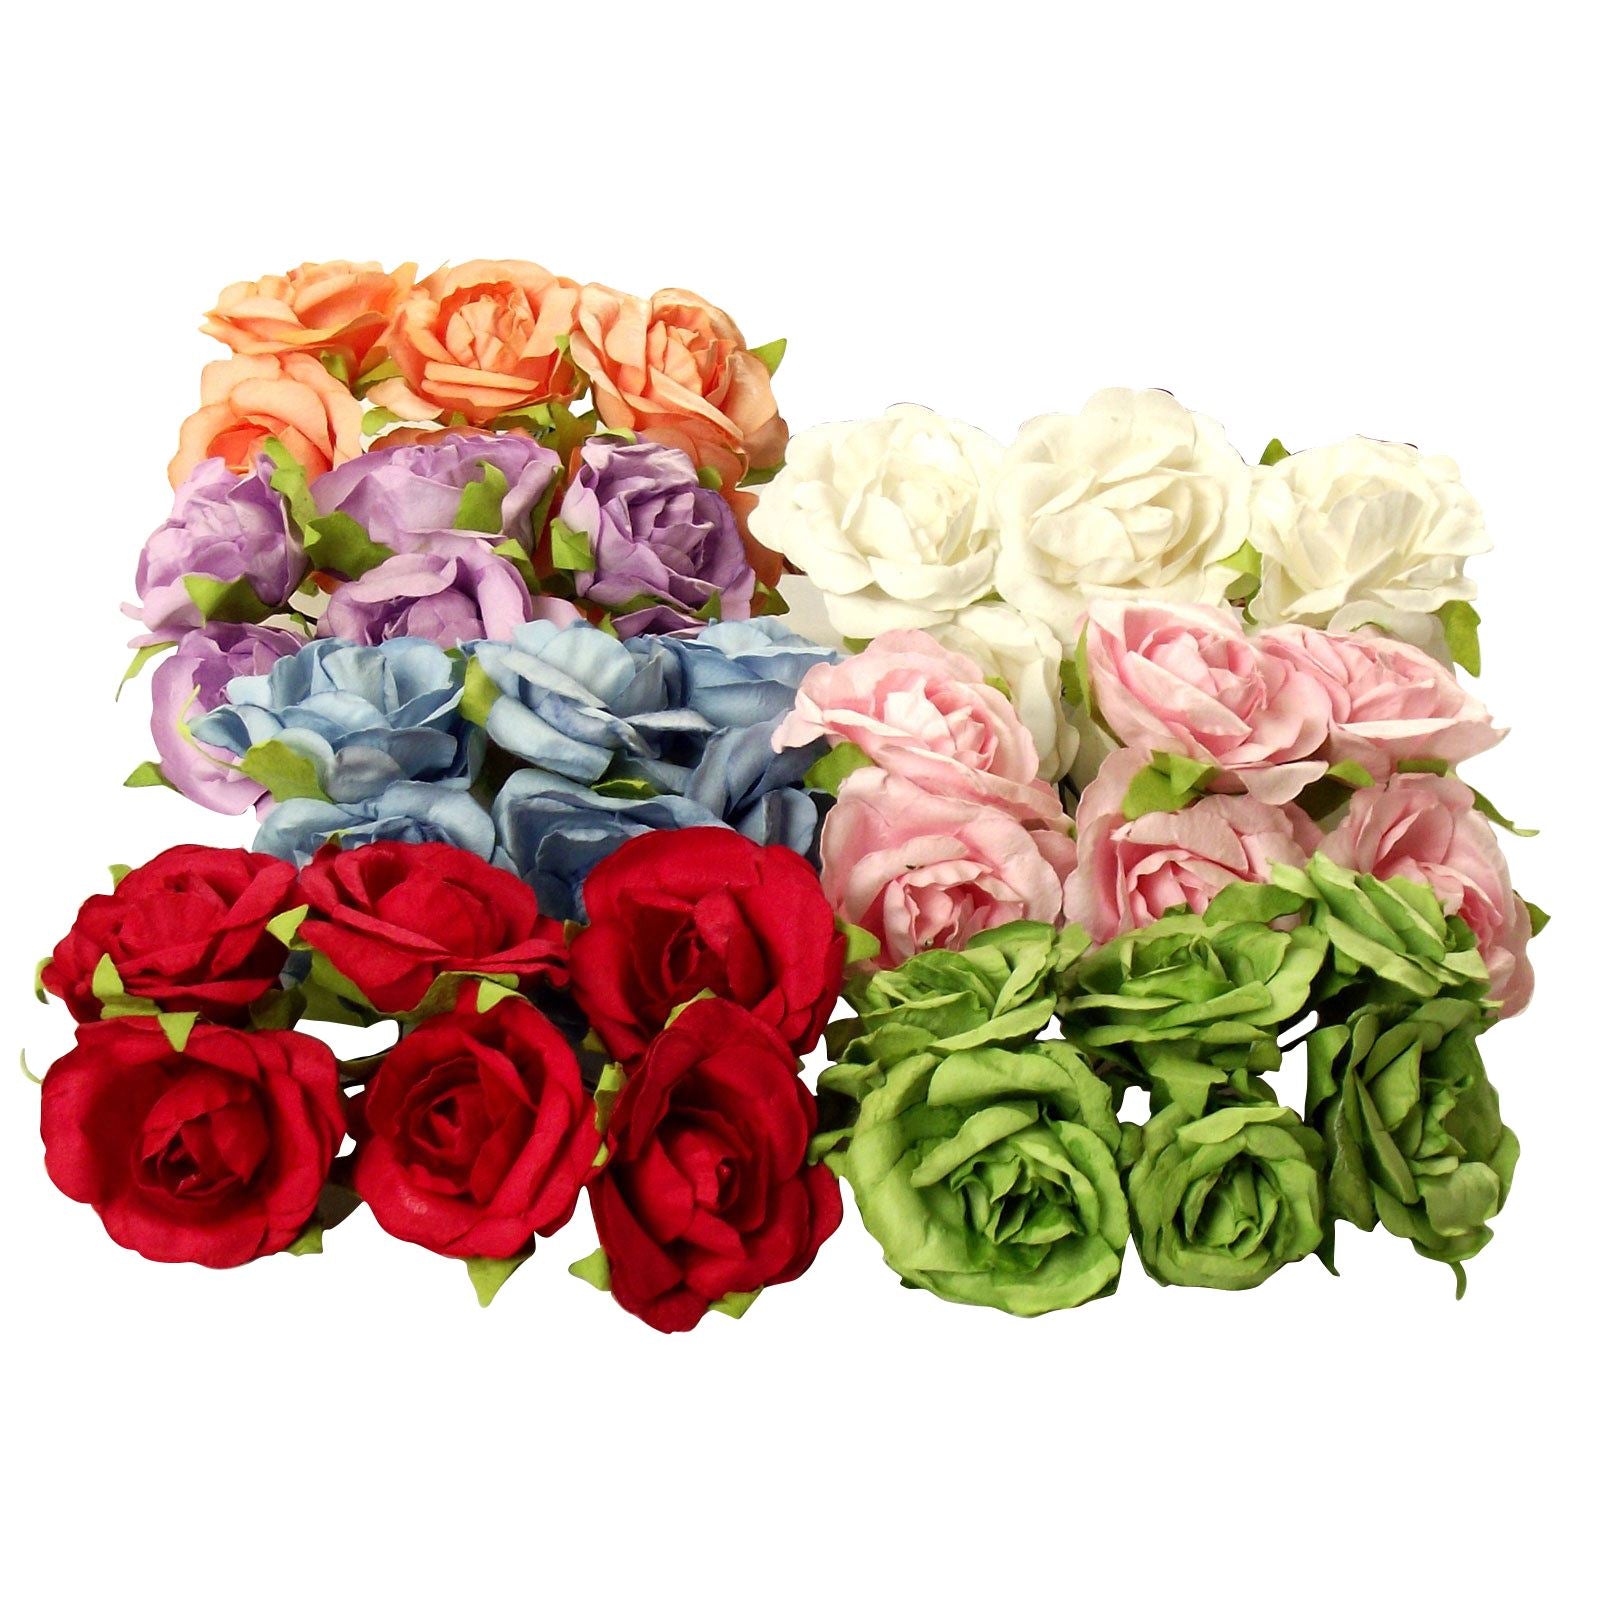 2x Bunches of 6 Open Paper Roses